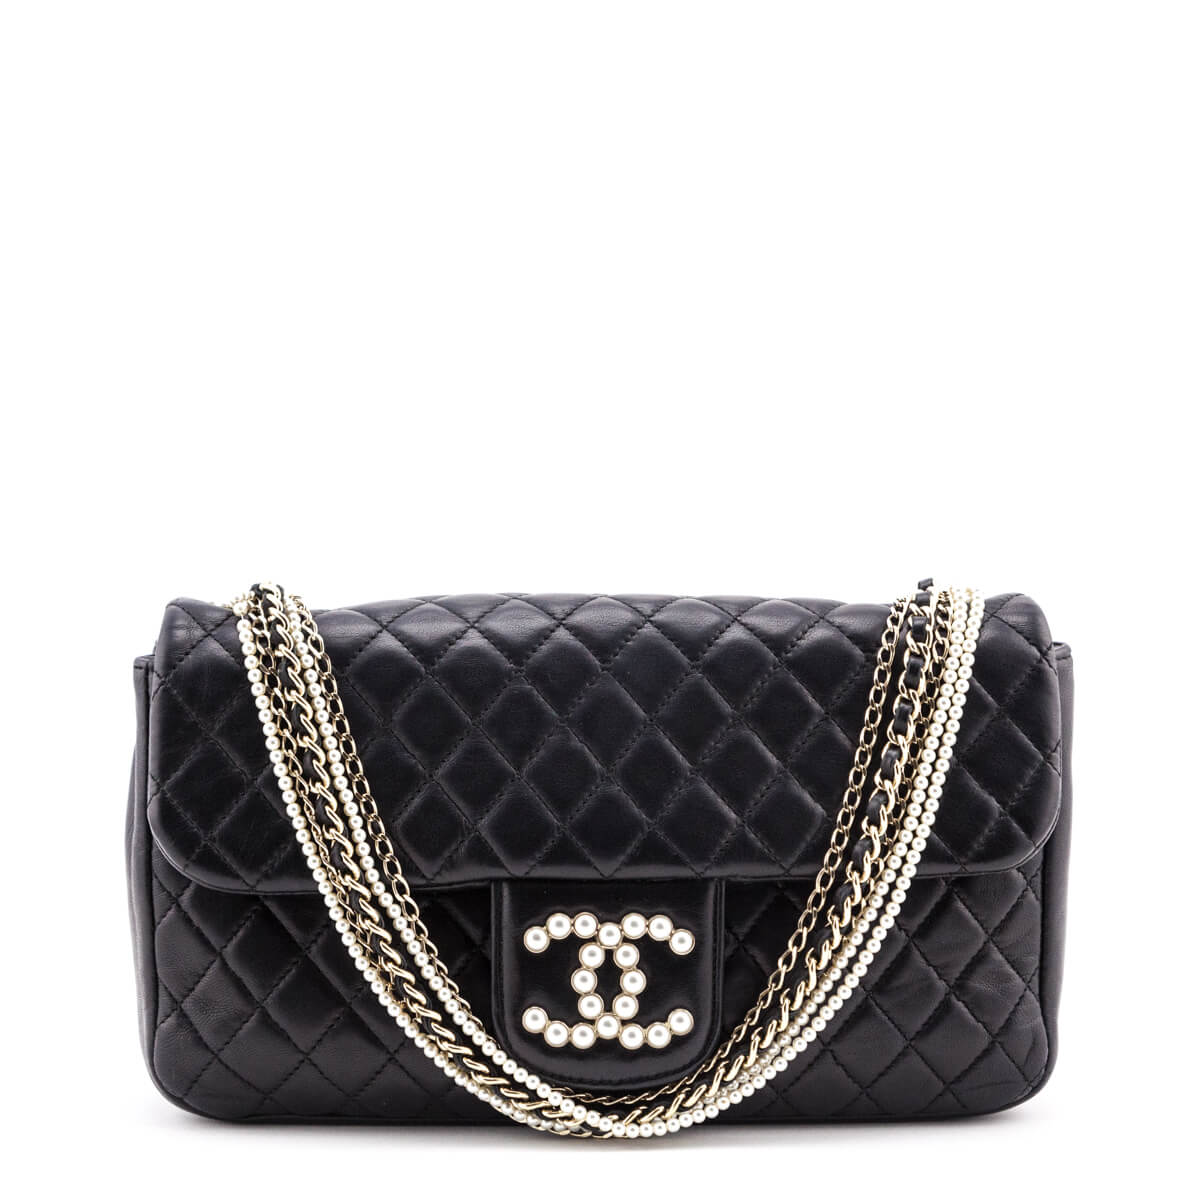 Authentic Chanel Black Lambskin Westminster Pearl Flap Bag Article: A94305  Y09157 Made in France, Accessorising - Brand Name / Designer Handbags For  Carry & We…